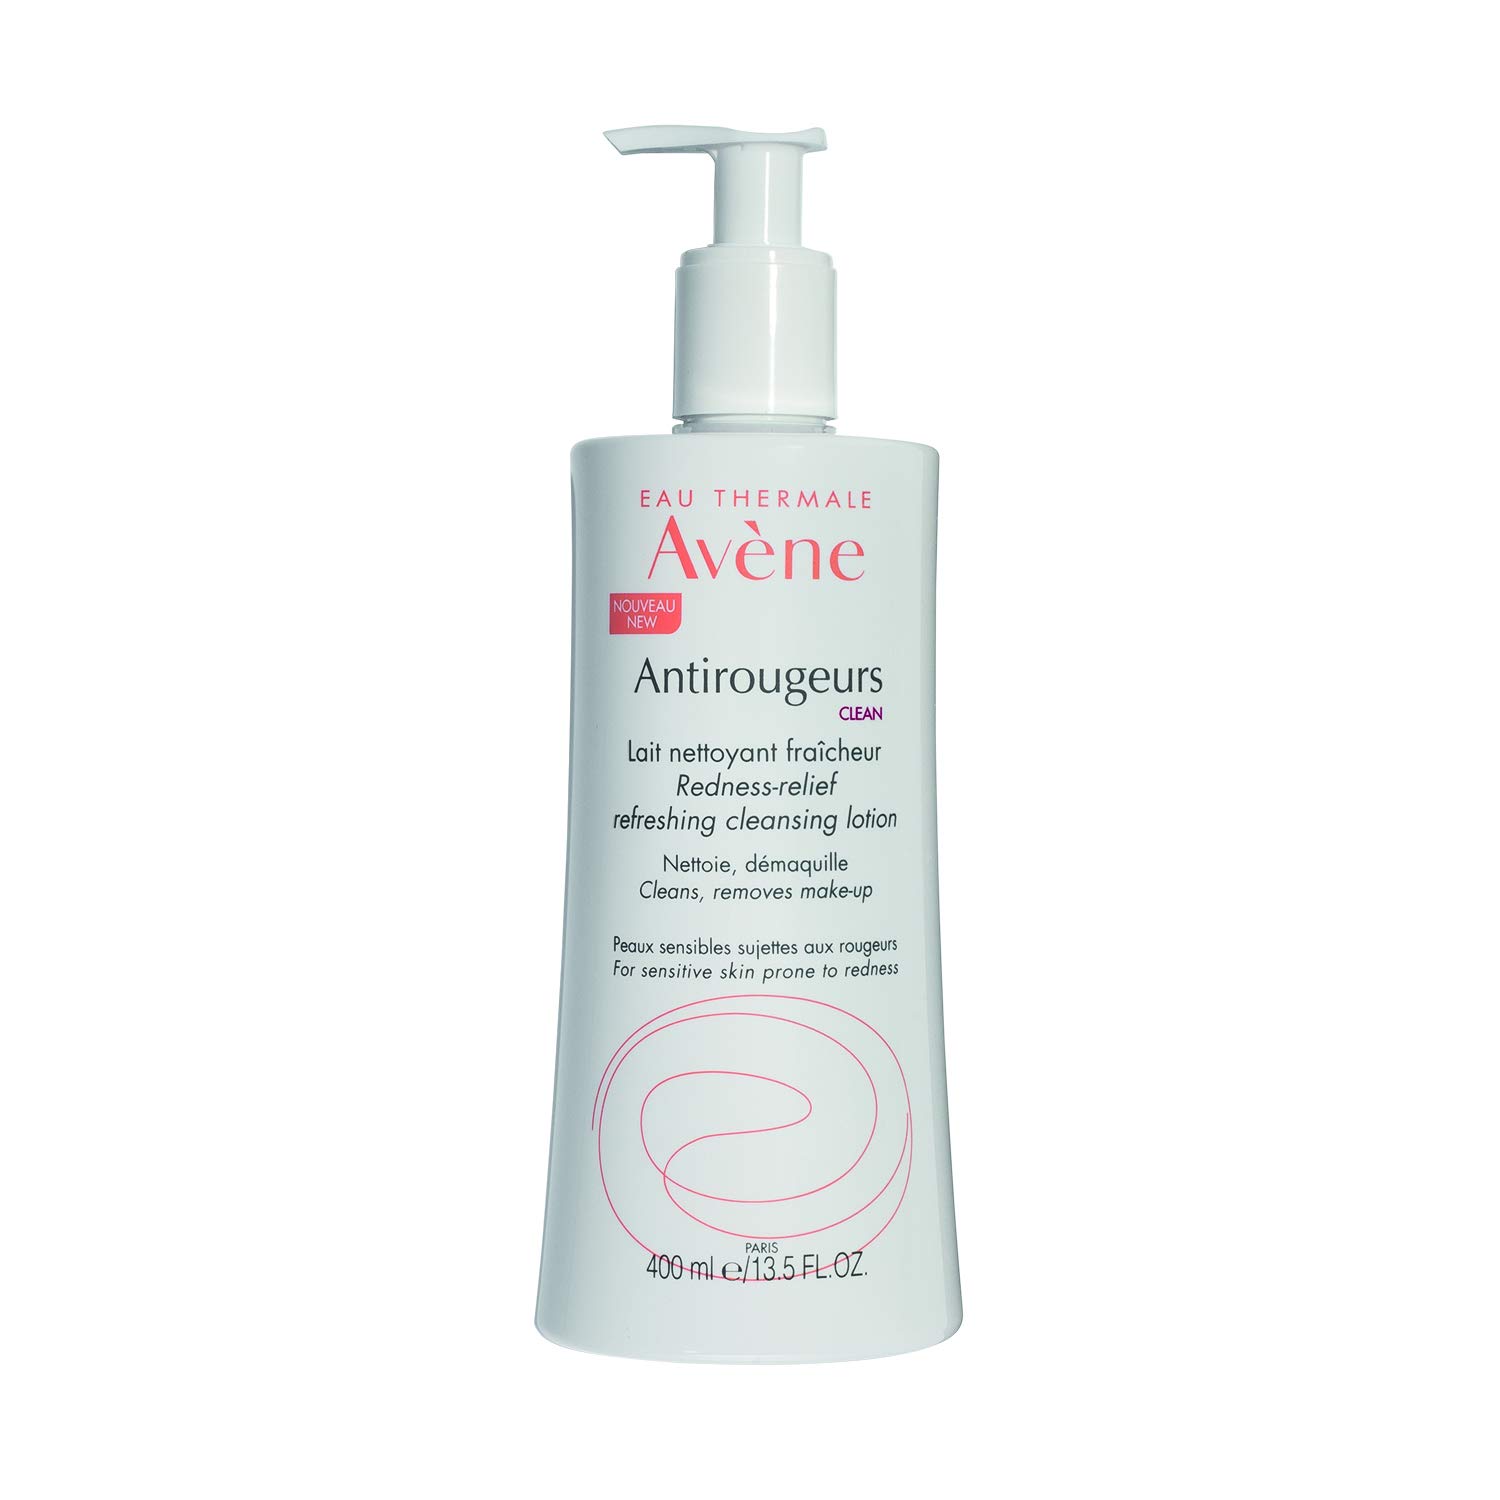 Unbekannt Eau Thermale Avène Peeling and Cleansing Face Mask 400 ml